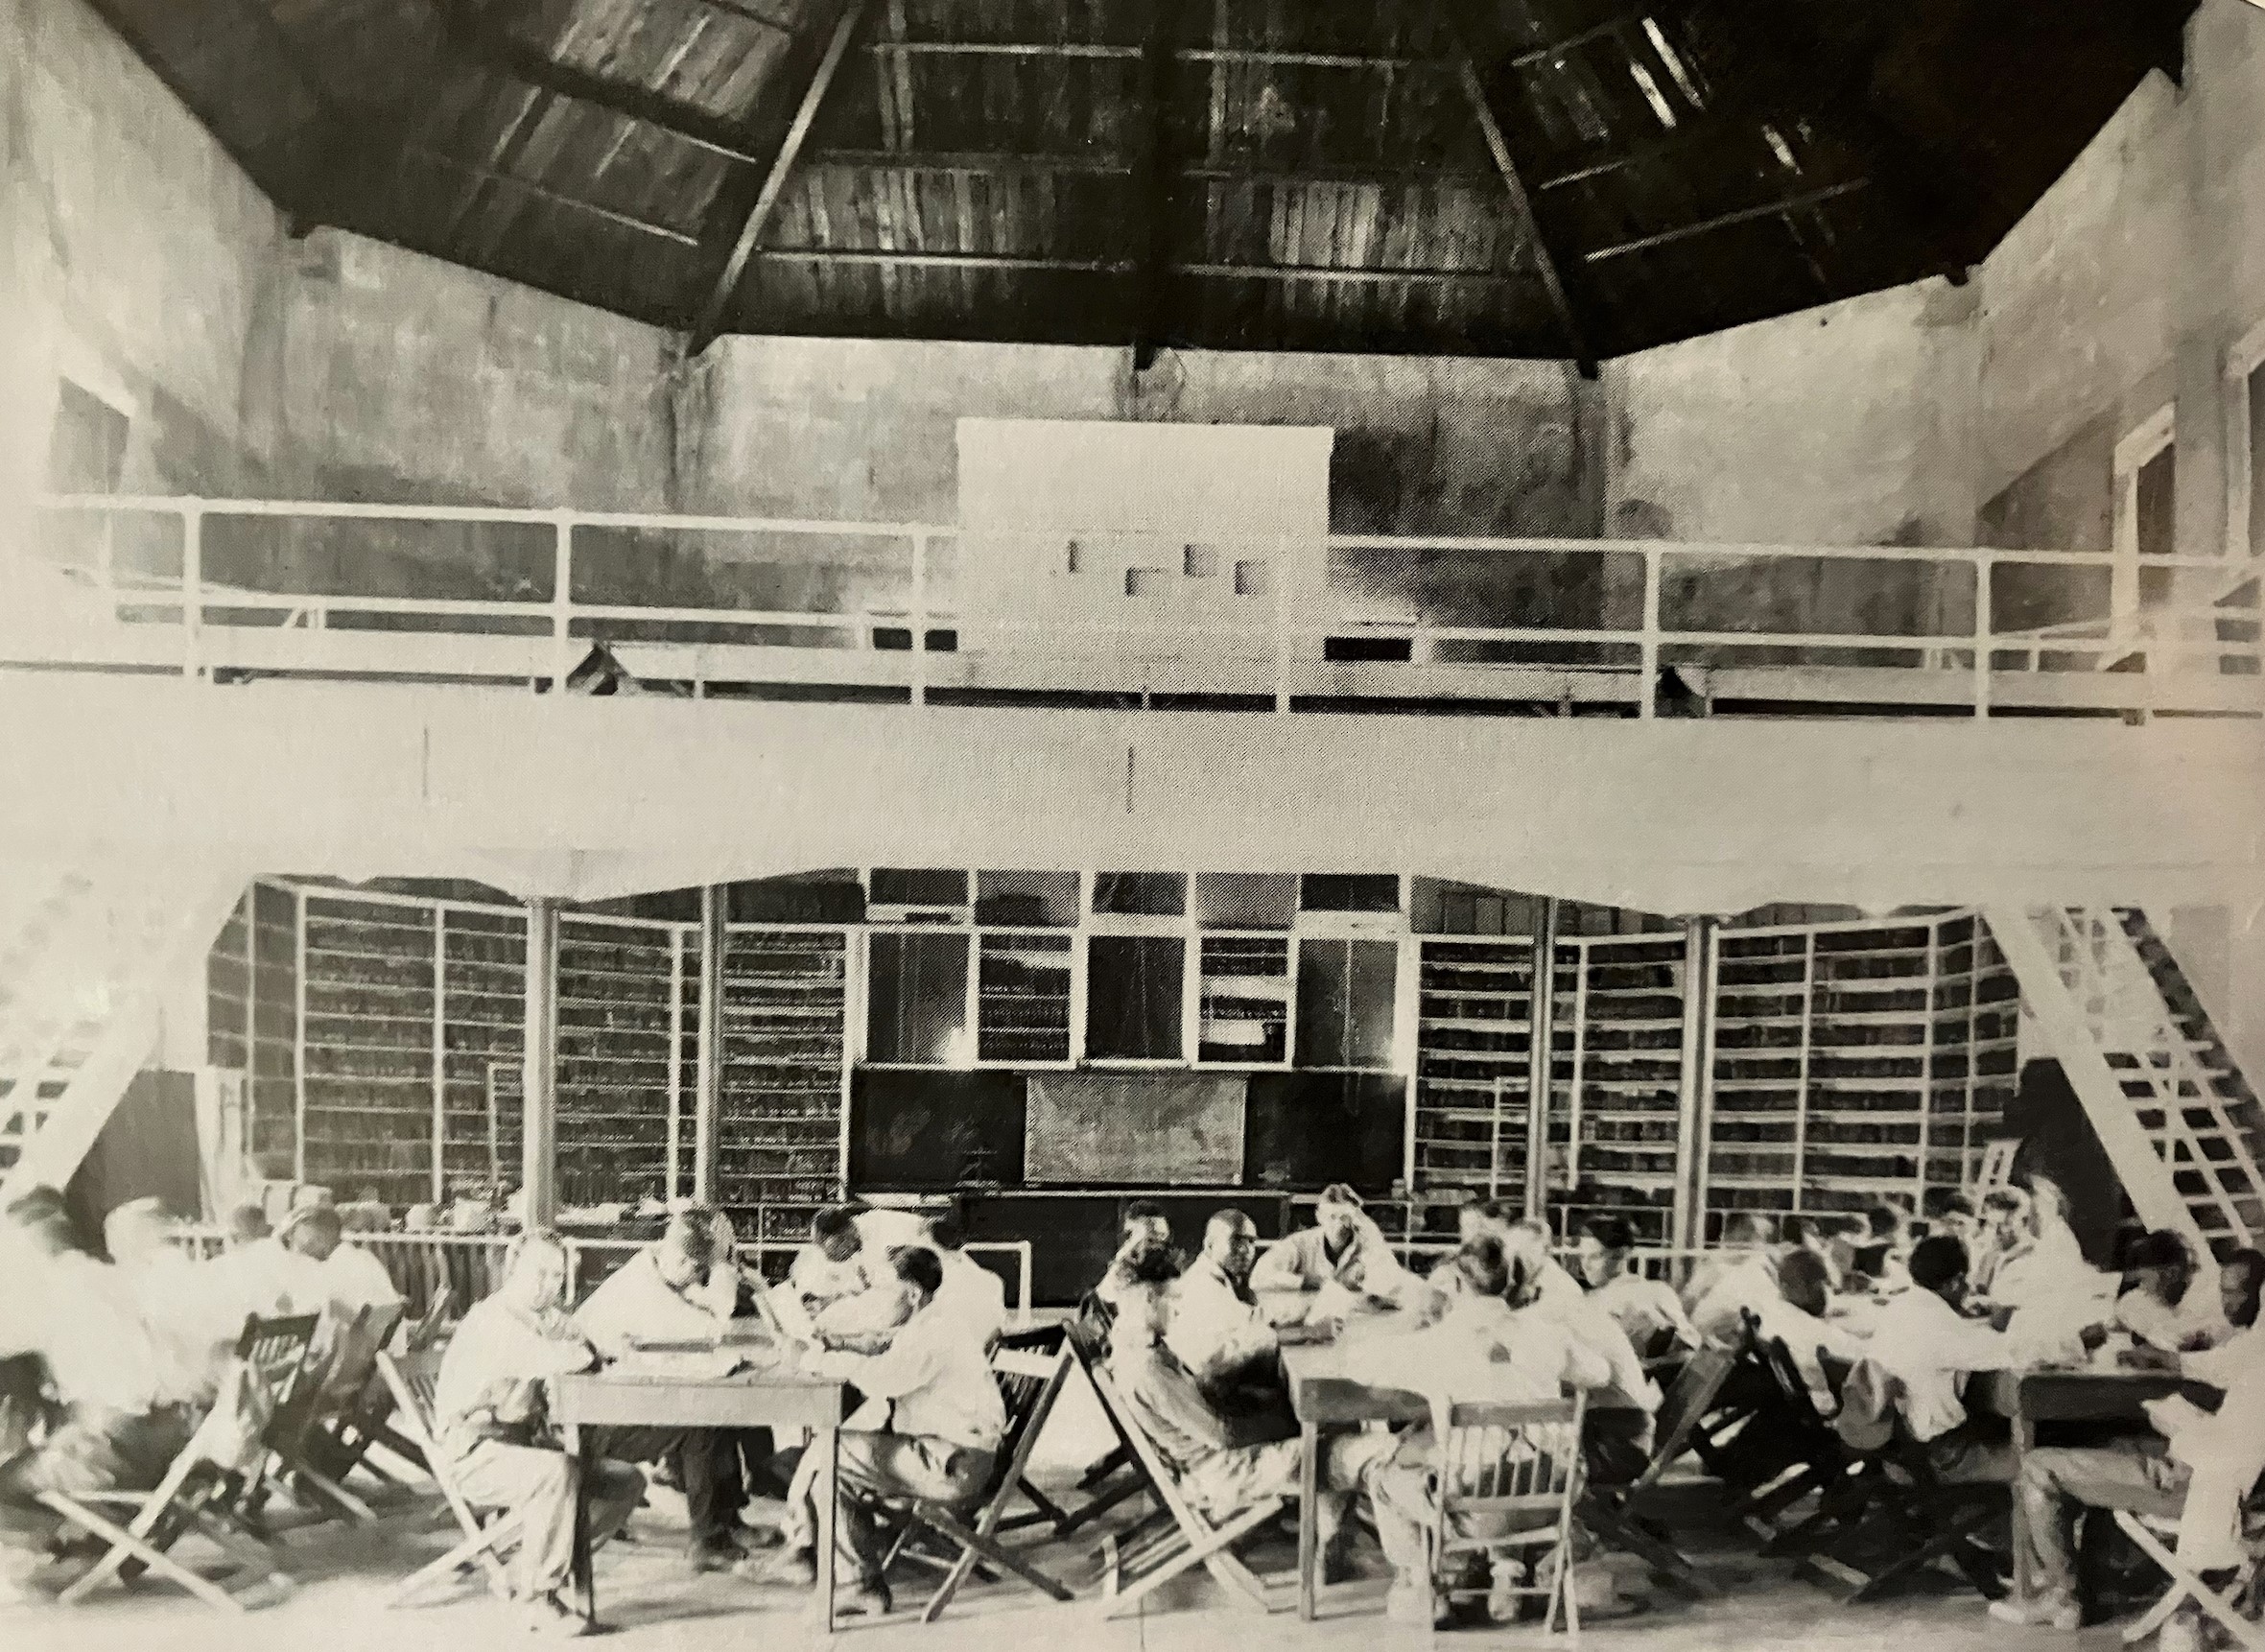 Classroom in Folsom State Prison in the 1920s.